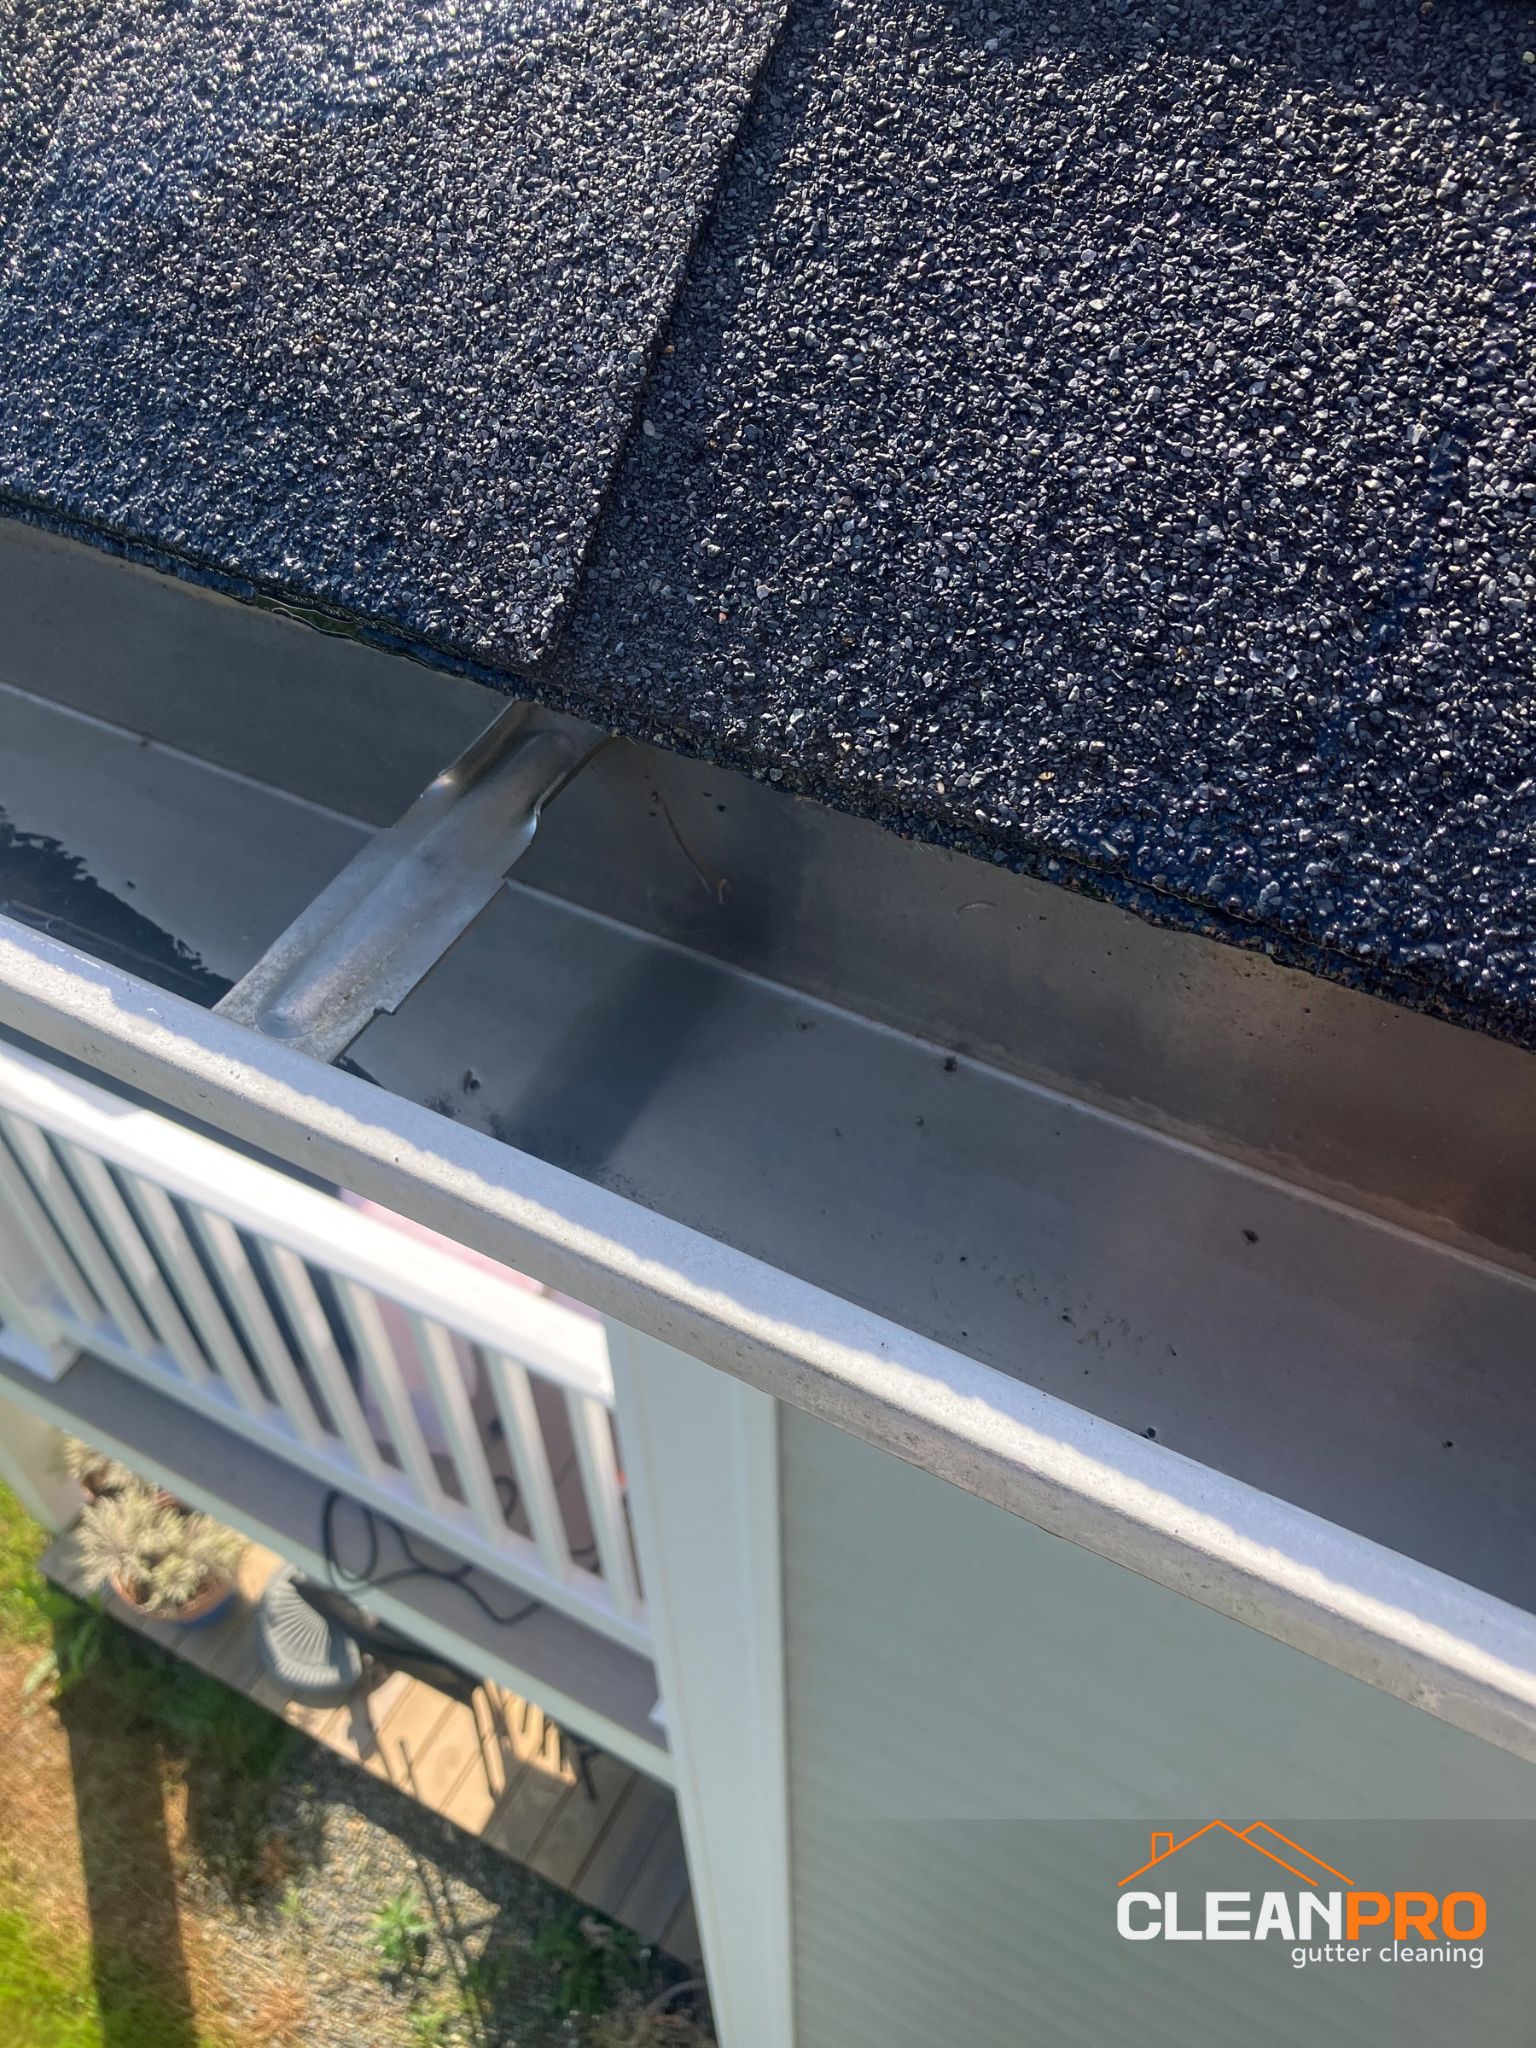 Top Notch Gutter Cleaning Service in Oklahoma City